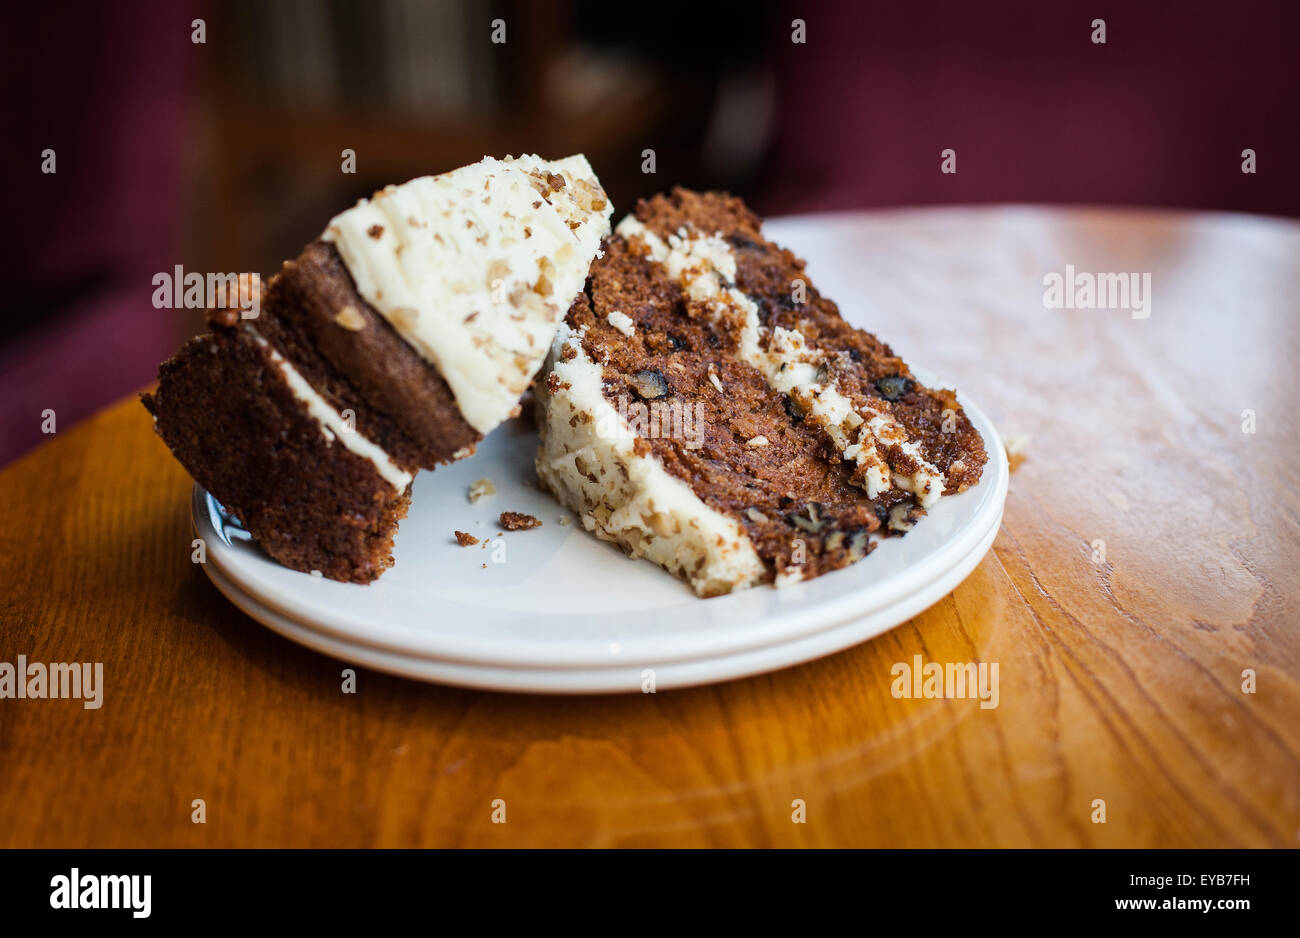 Two slices of delicious looking Carrot cake  on a cafe table waiting to be eaten. Made using an oil based recipe Stock Photo